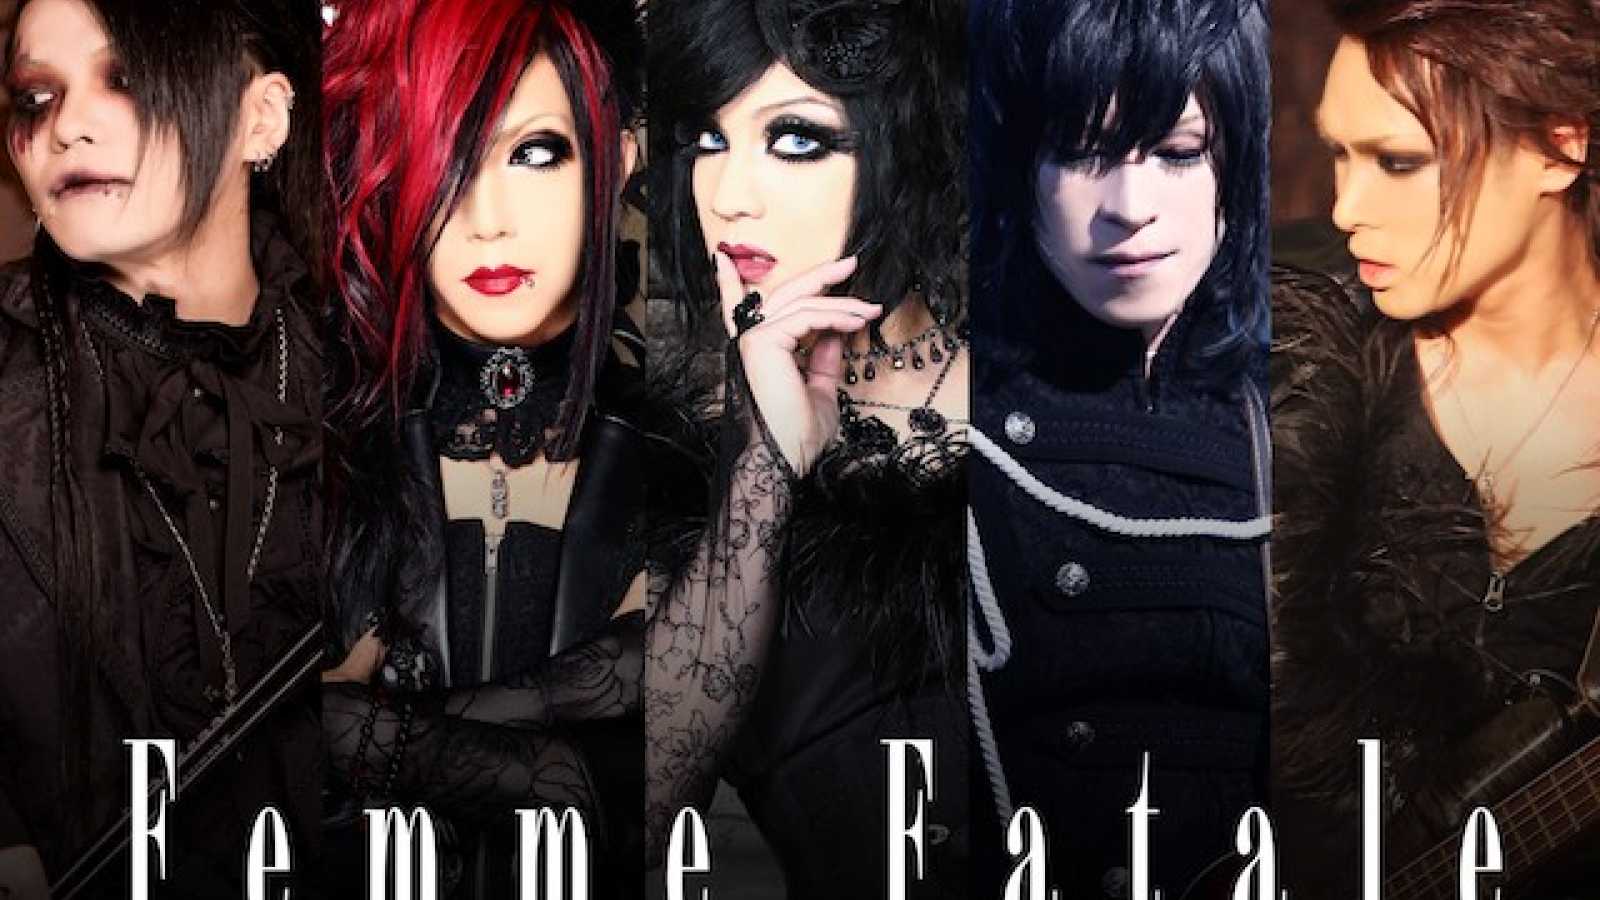 10th Anniversary Compilation from Femme Fatale © Femme Fatale. All rights reserved.